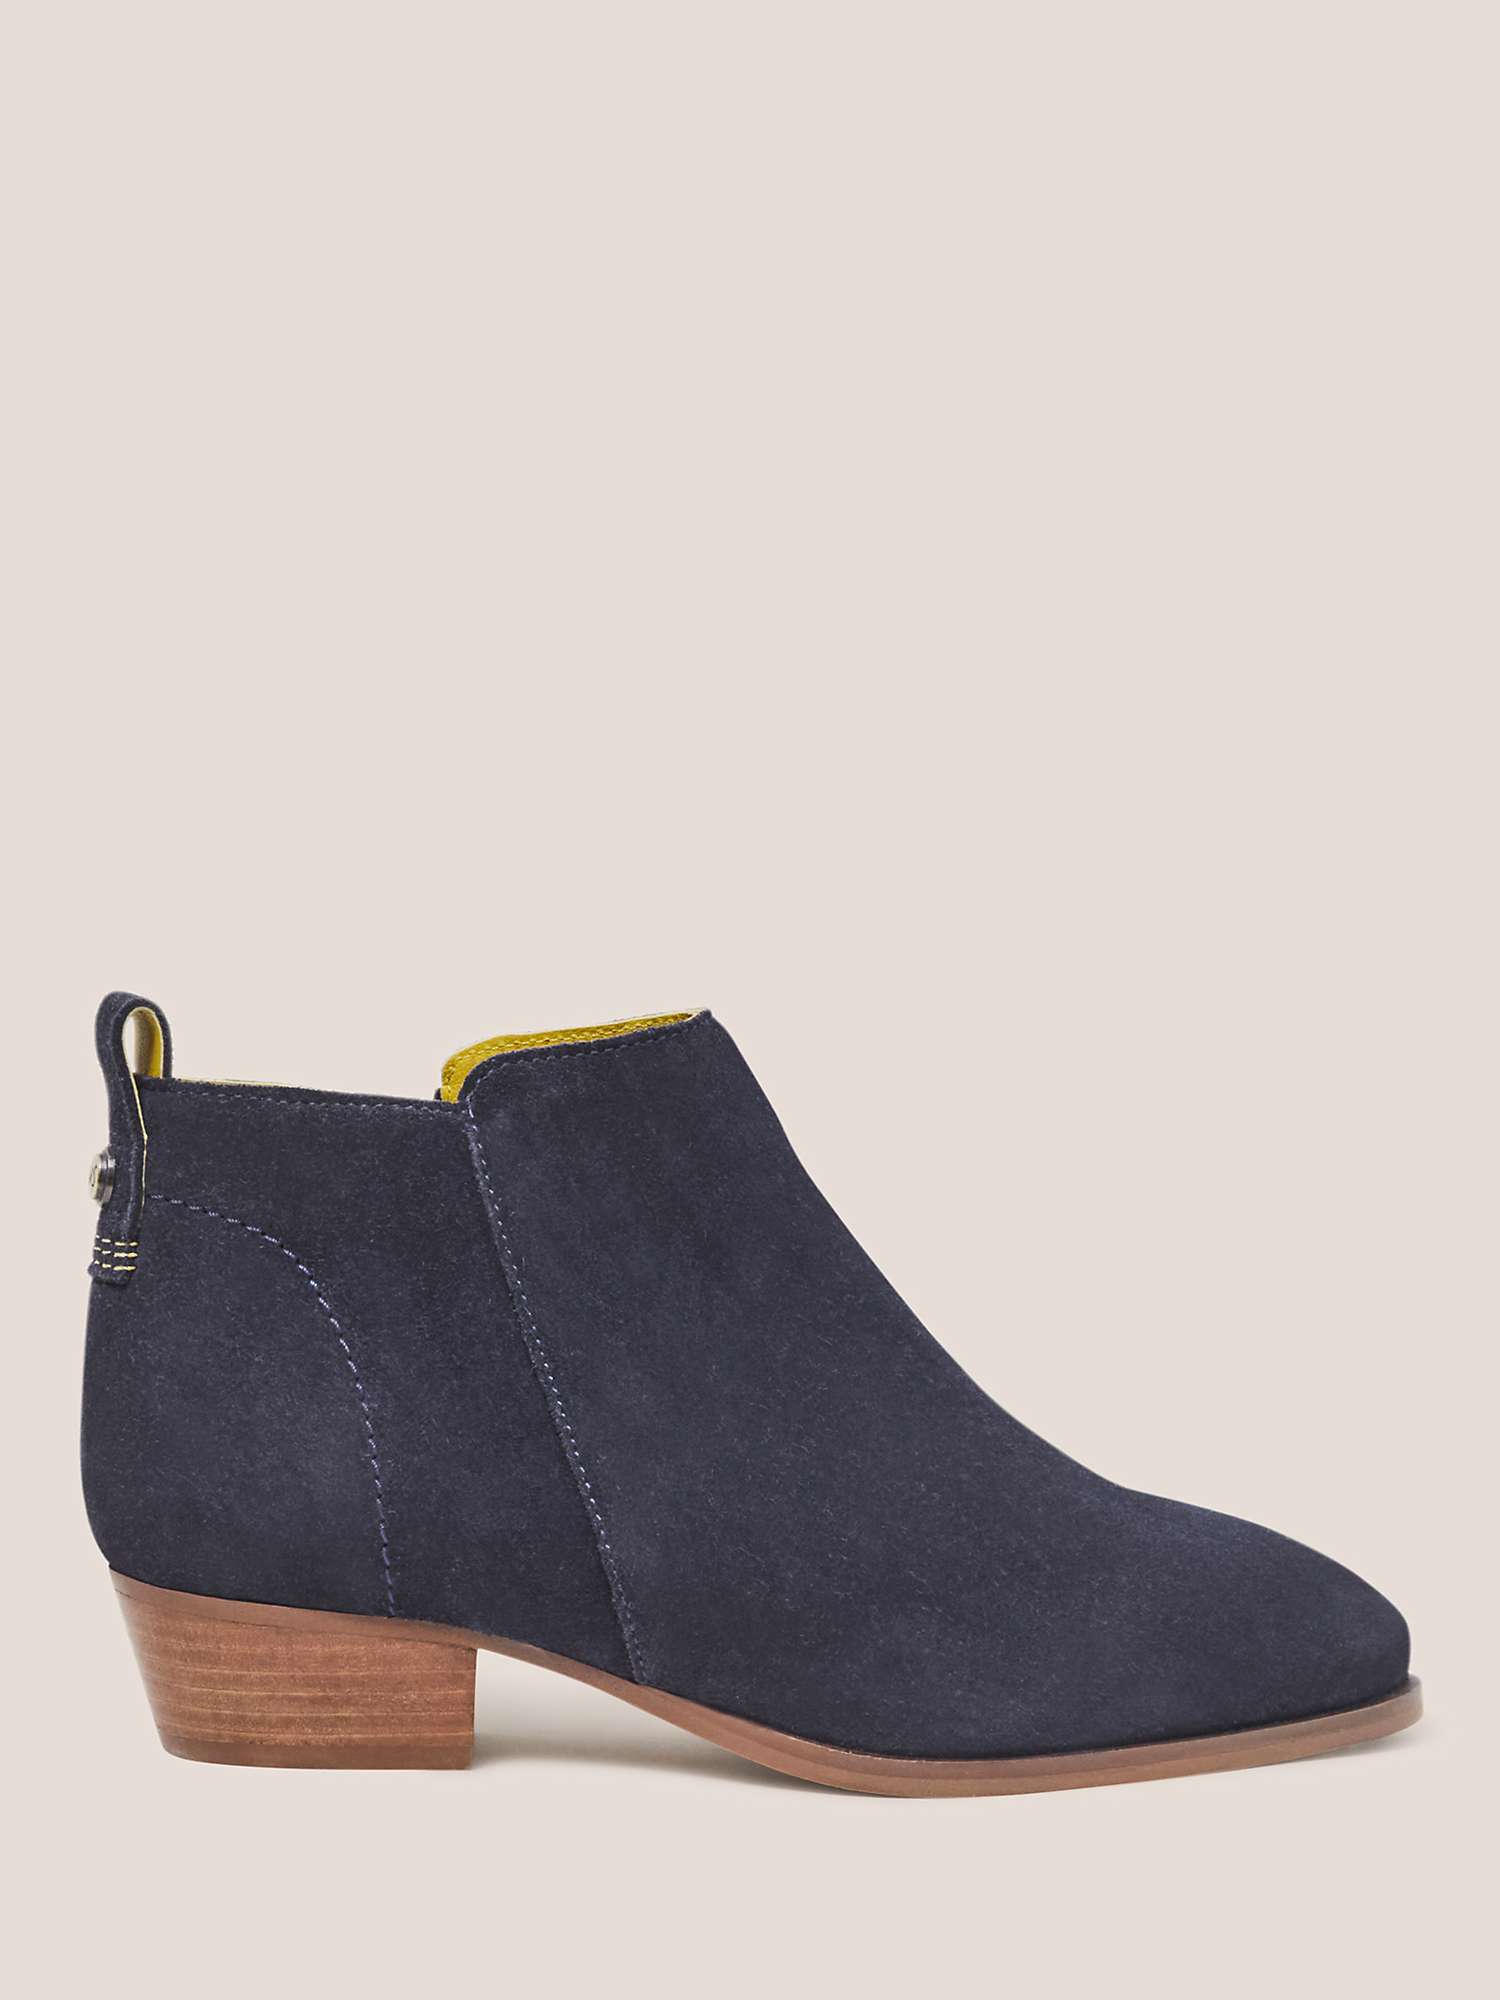 Buy White Stuff Willow Suede Ankle Boots Online at johnlewis.com